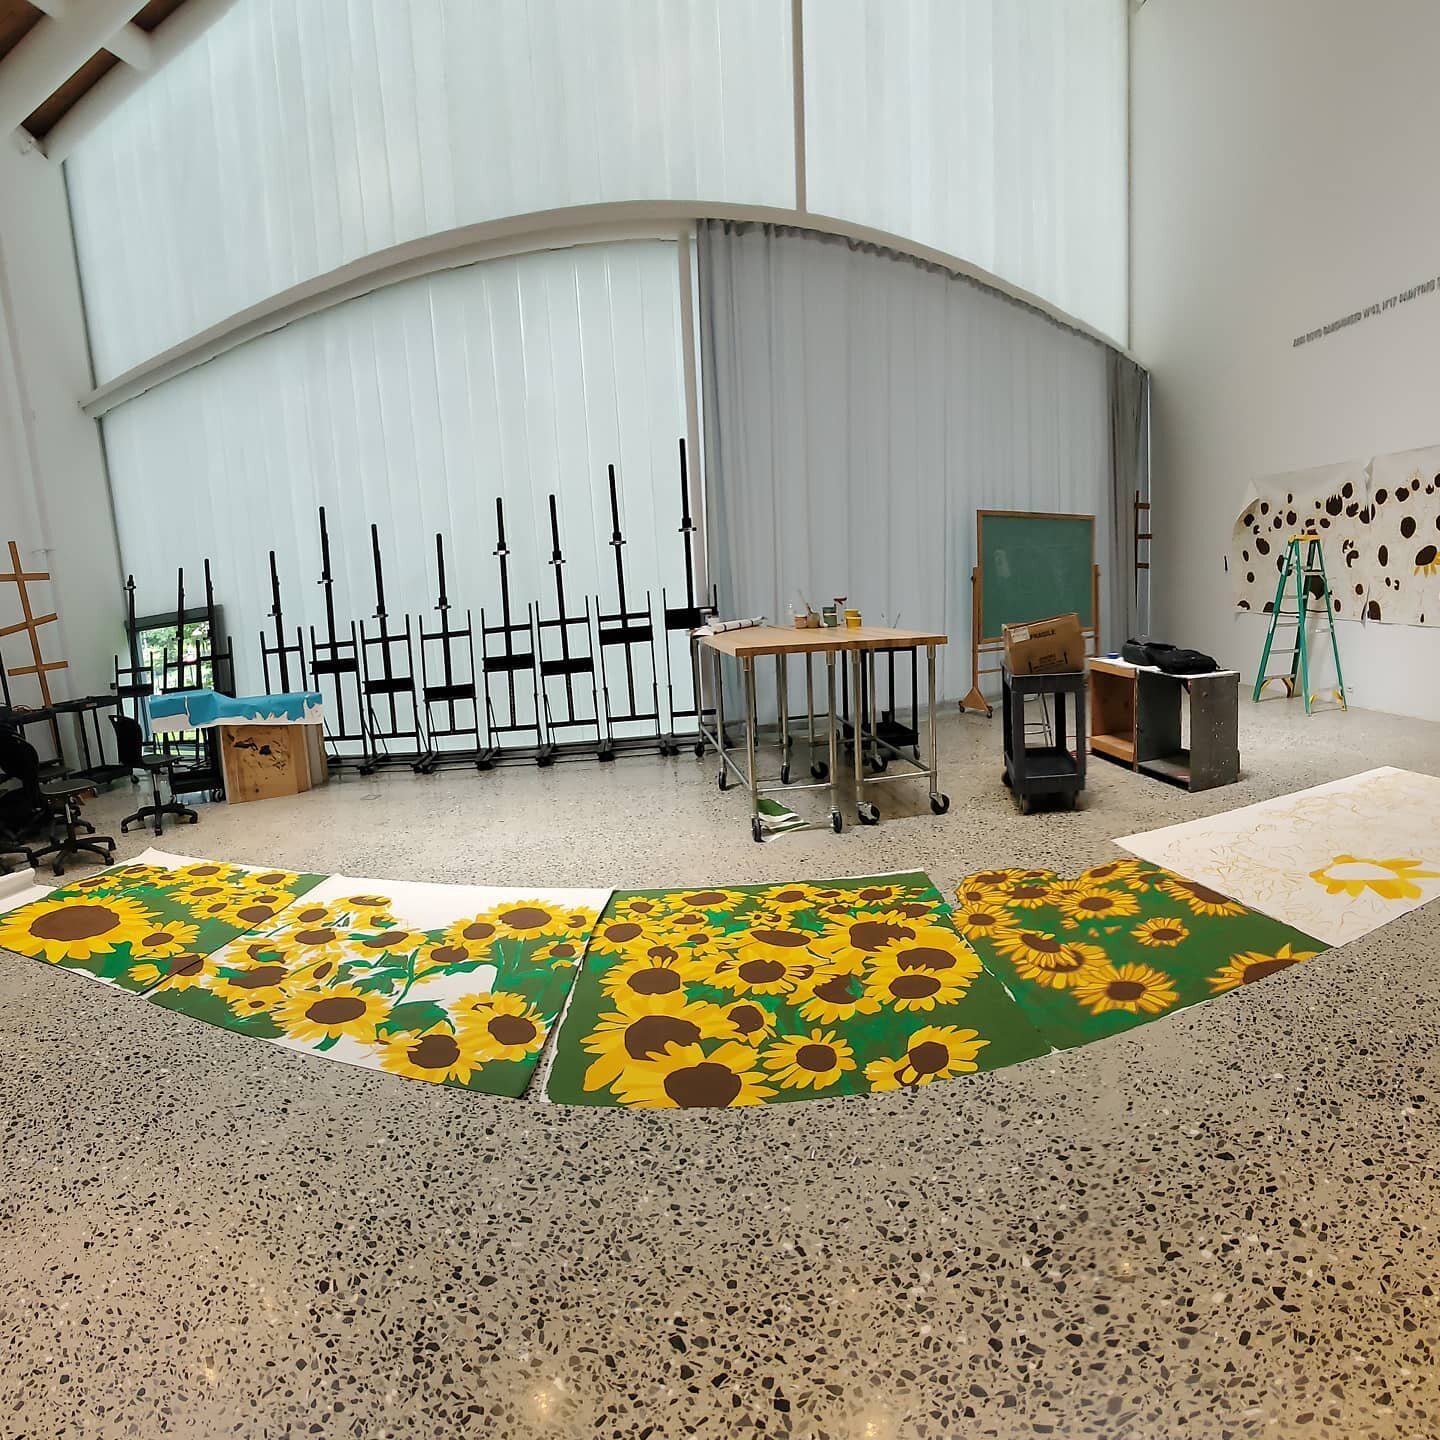 We've got 20 more feet of sunflowers to paint this Saturday at the Beaver Street Lot (341 Beaver)! Join us and check out the newly resurfaced wall thanks to LD Painting and @pennstone !